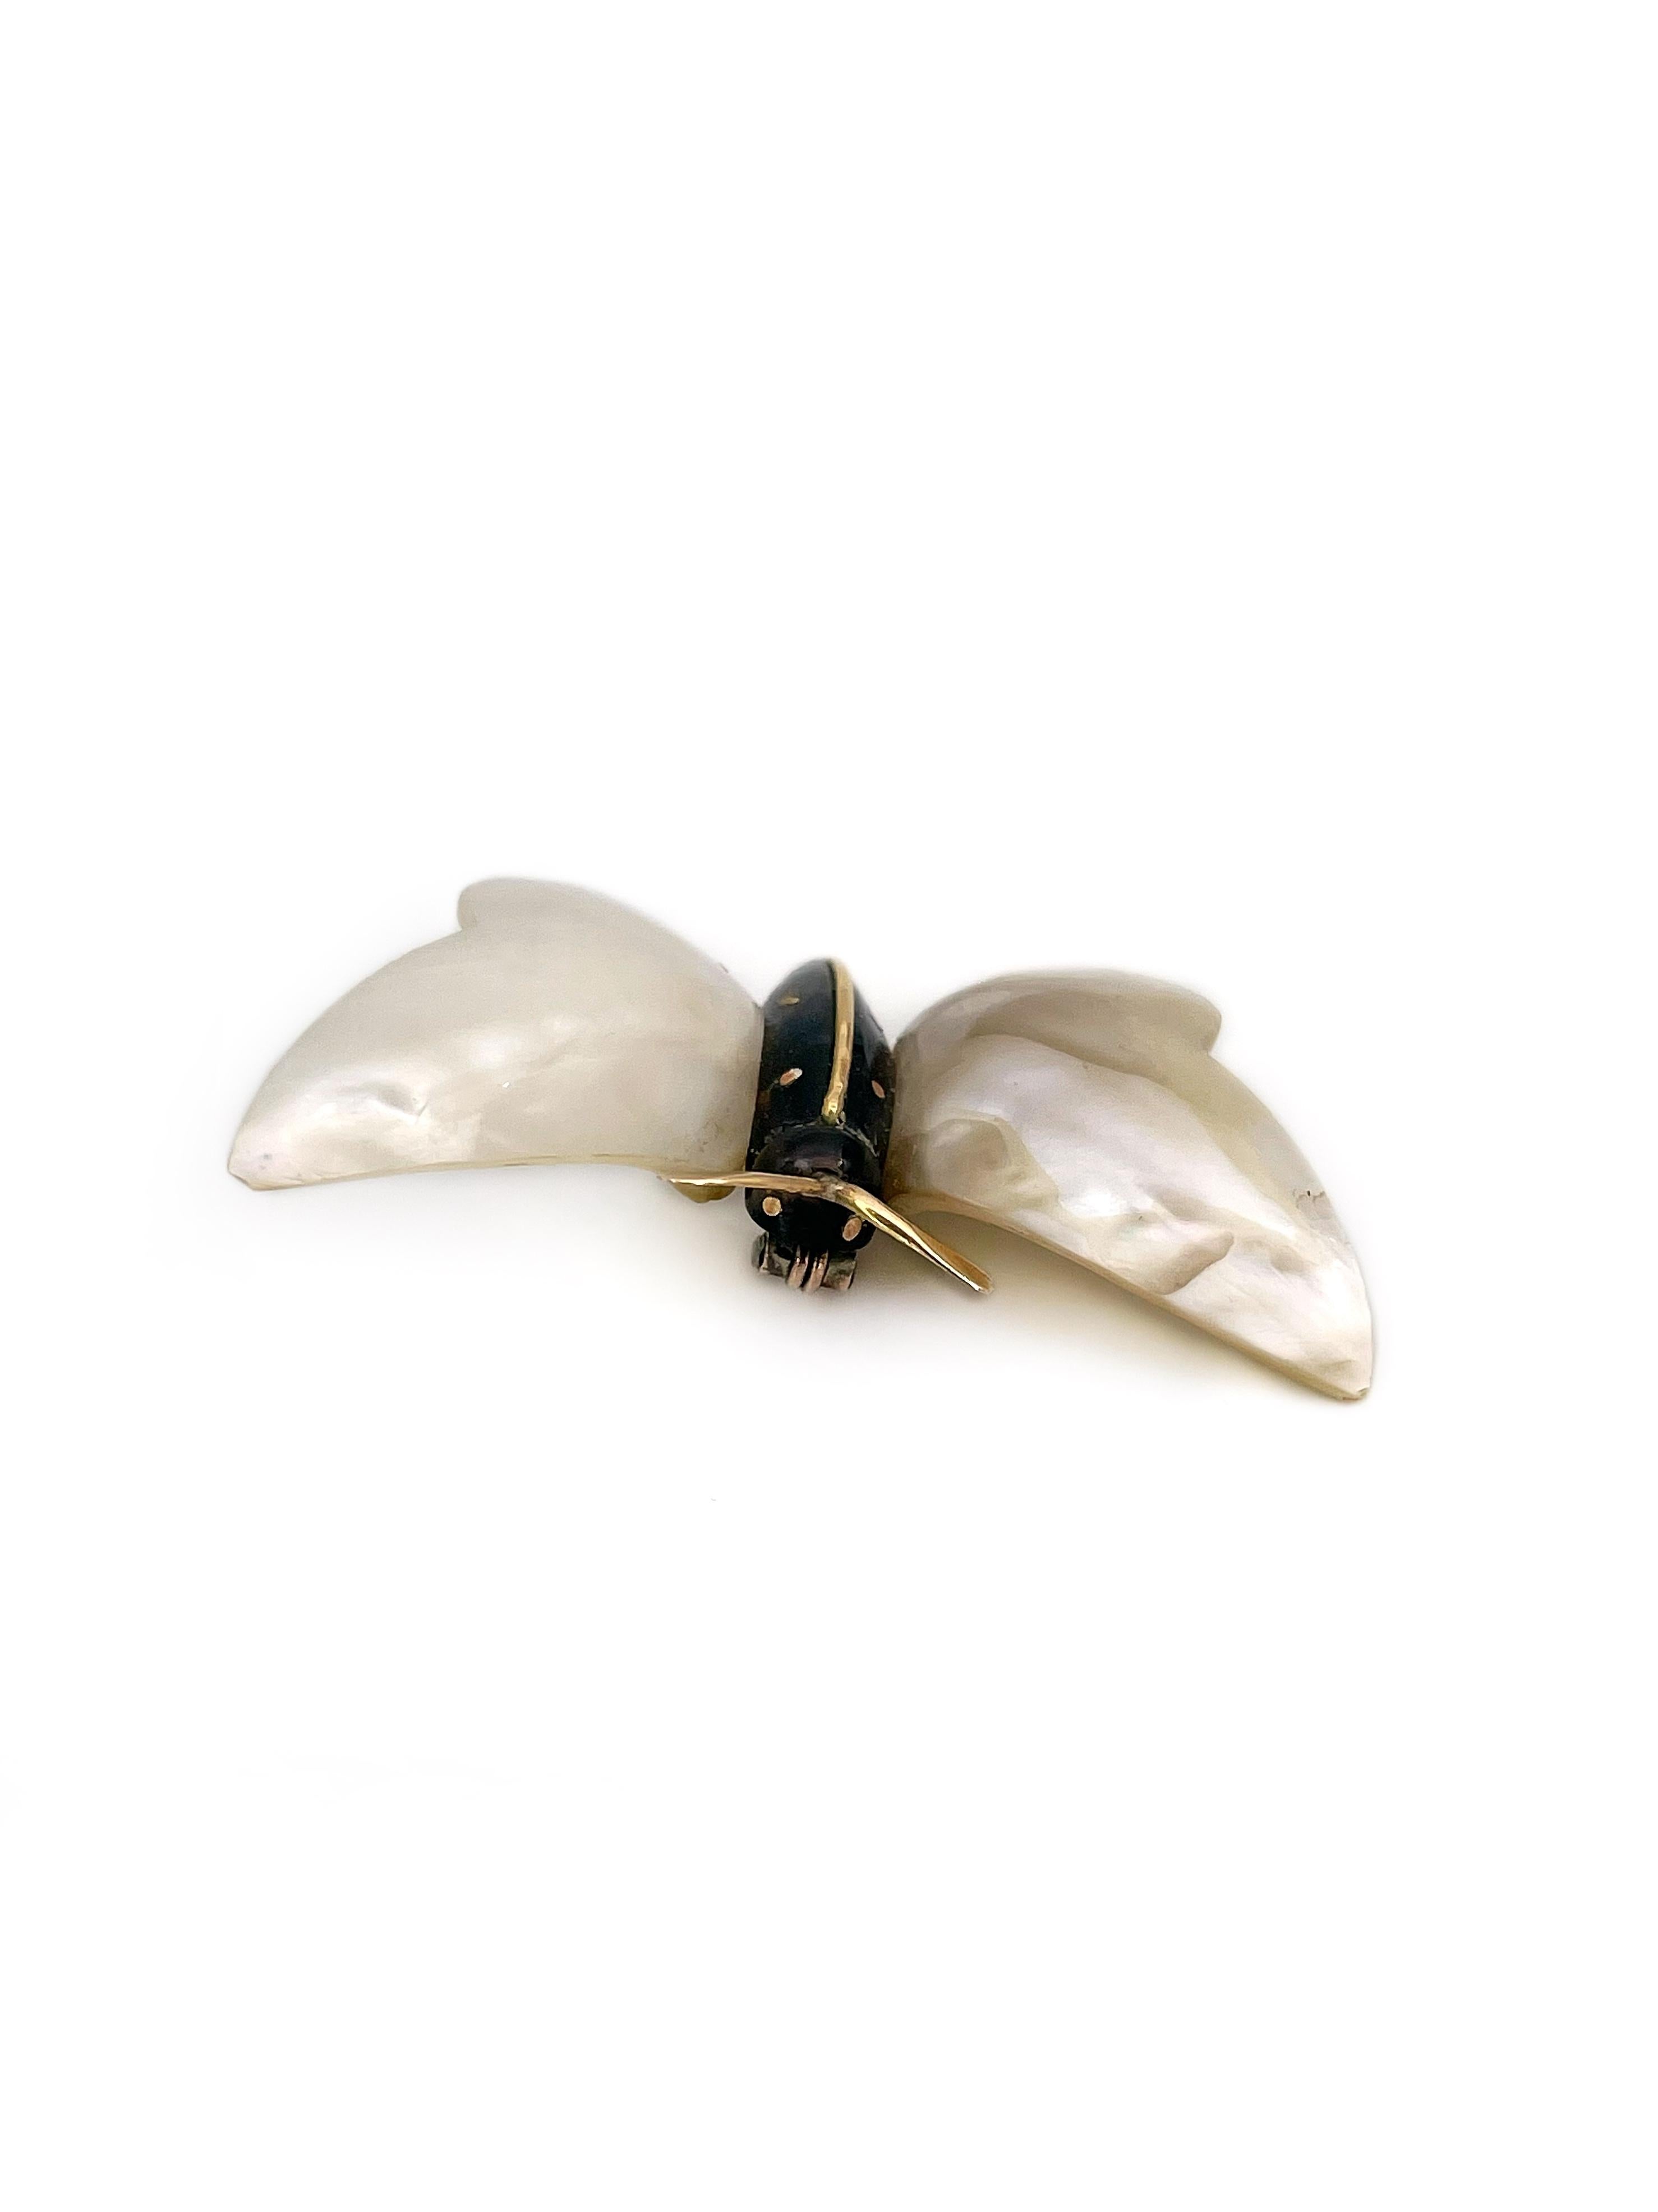 This is an elegant Edwardian butterfly shaped pin brooch. It is adorned with gold. The wings are made of mother of pearl and the body - resin.

Weight: 3.17g
Size: 4x3cm

———

If you have any questions, please feel free to ask. We describe our items